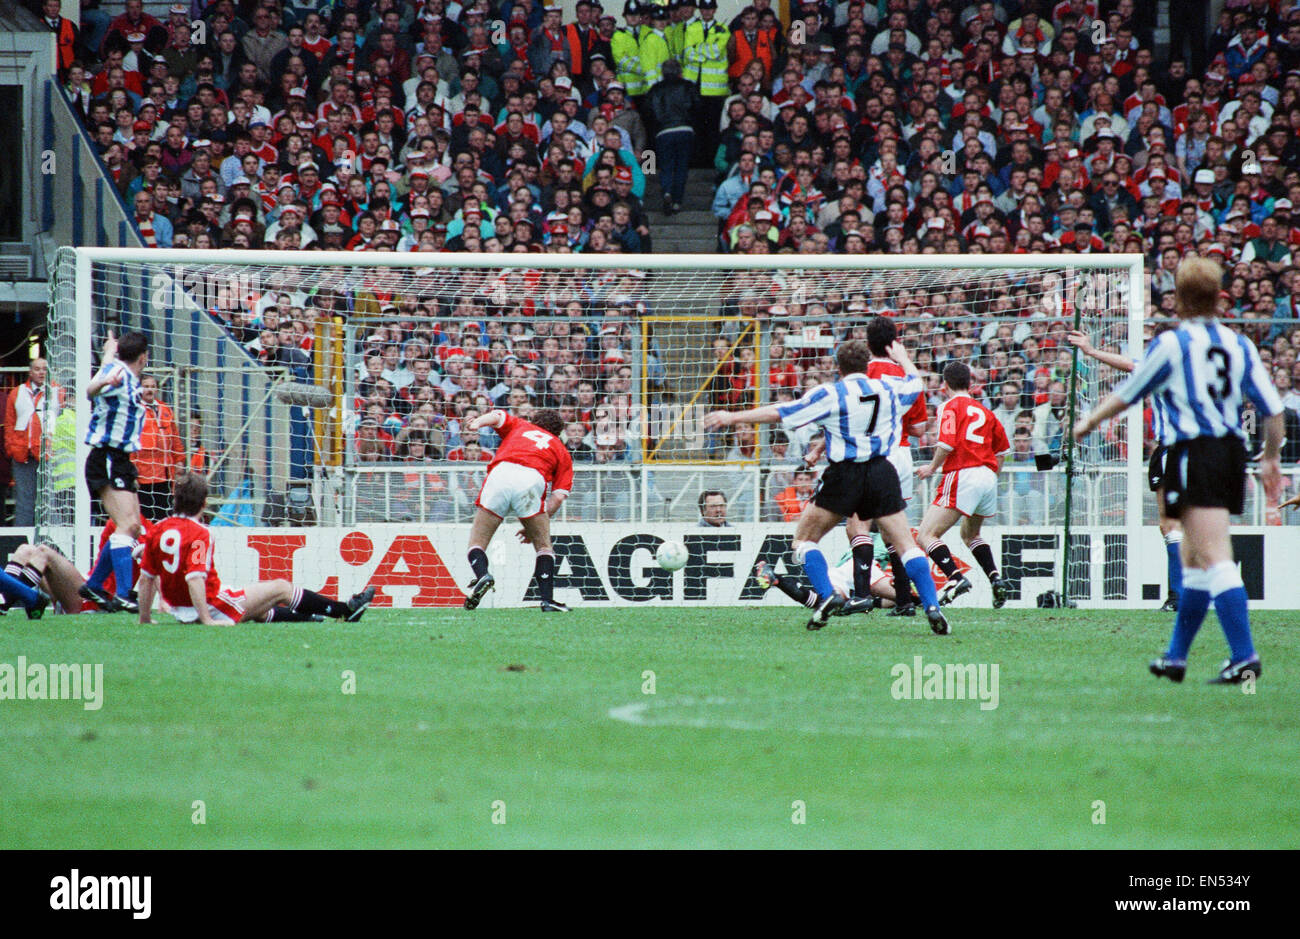 Rumbelows Cup Cup Final at Wembley Stadium. Sheffield Wednesday 1 v Manchester United 0. The games only goal, scored by John Sheridan. 21st April 1991. Stock Photo